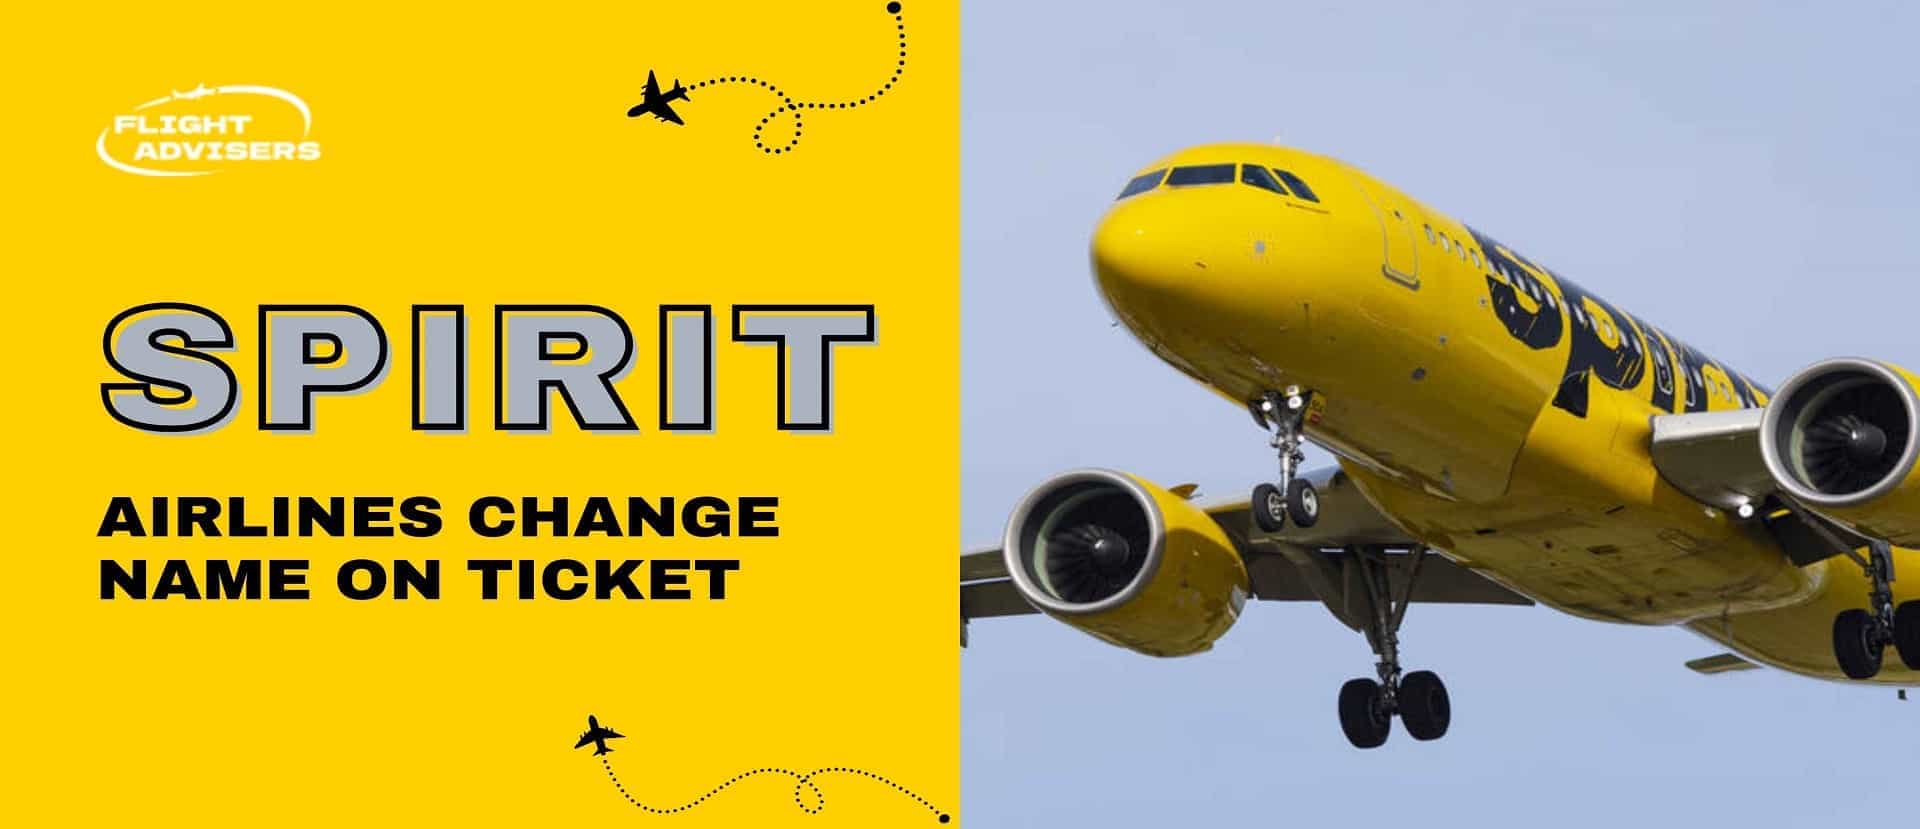 spirit-airlines-change-name-on-ticket